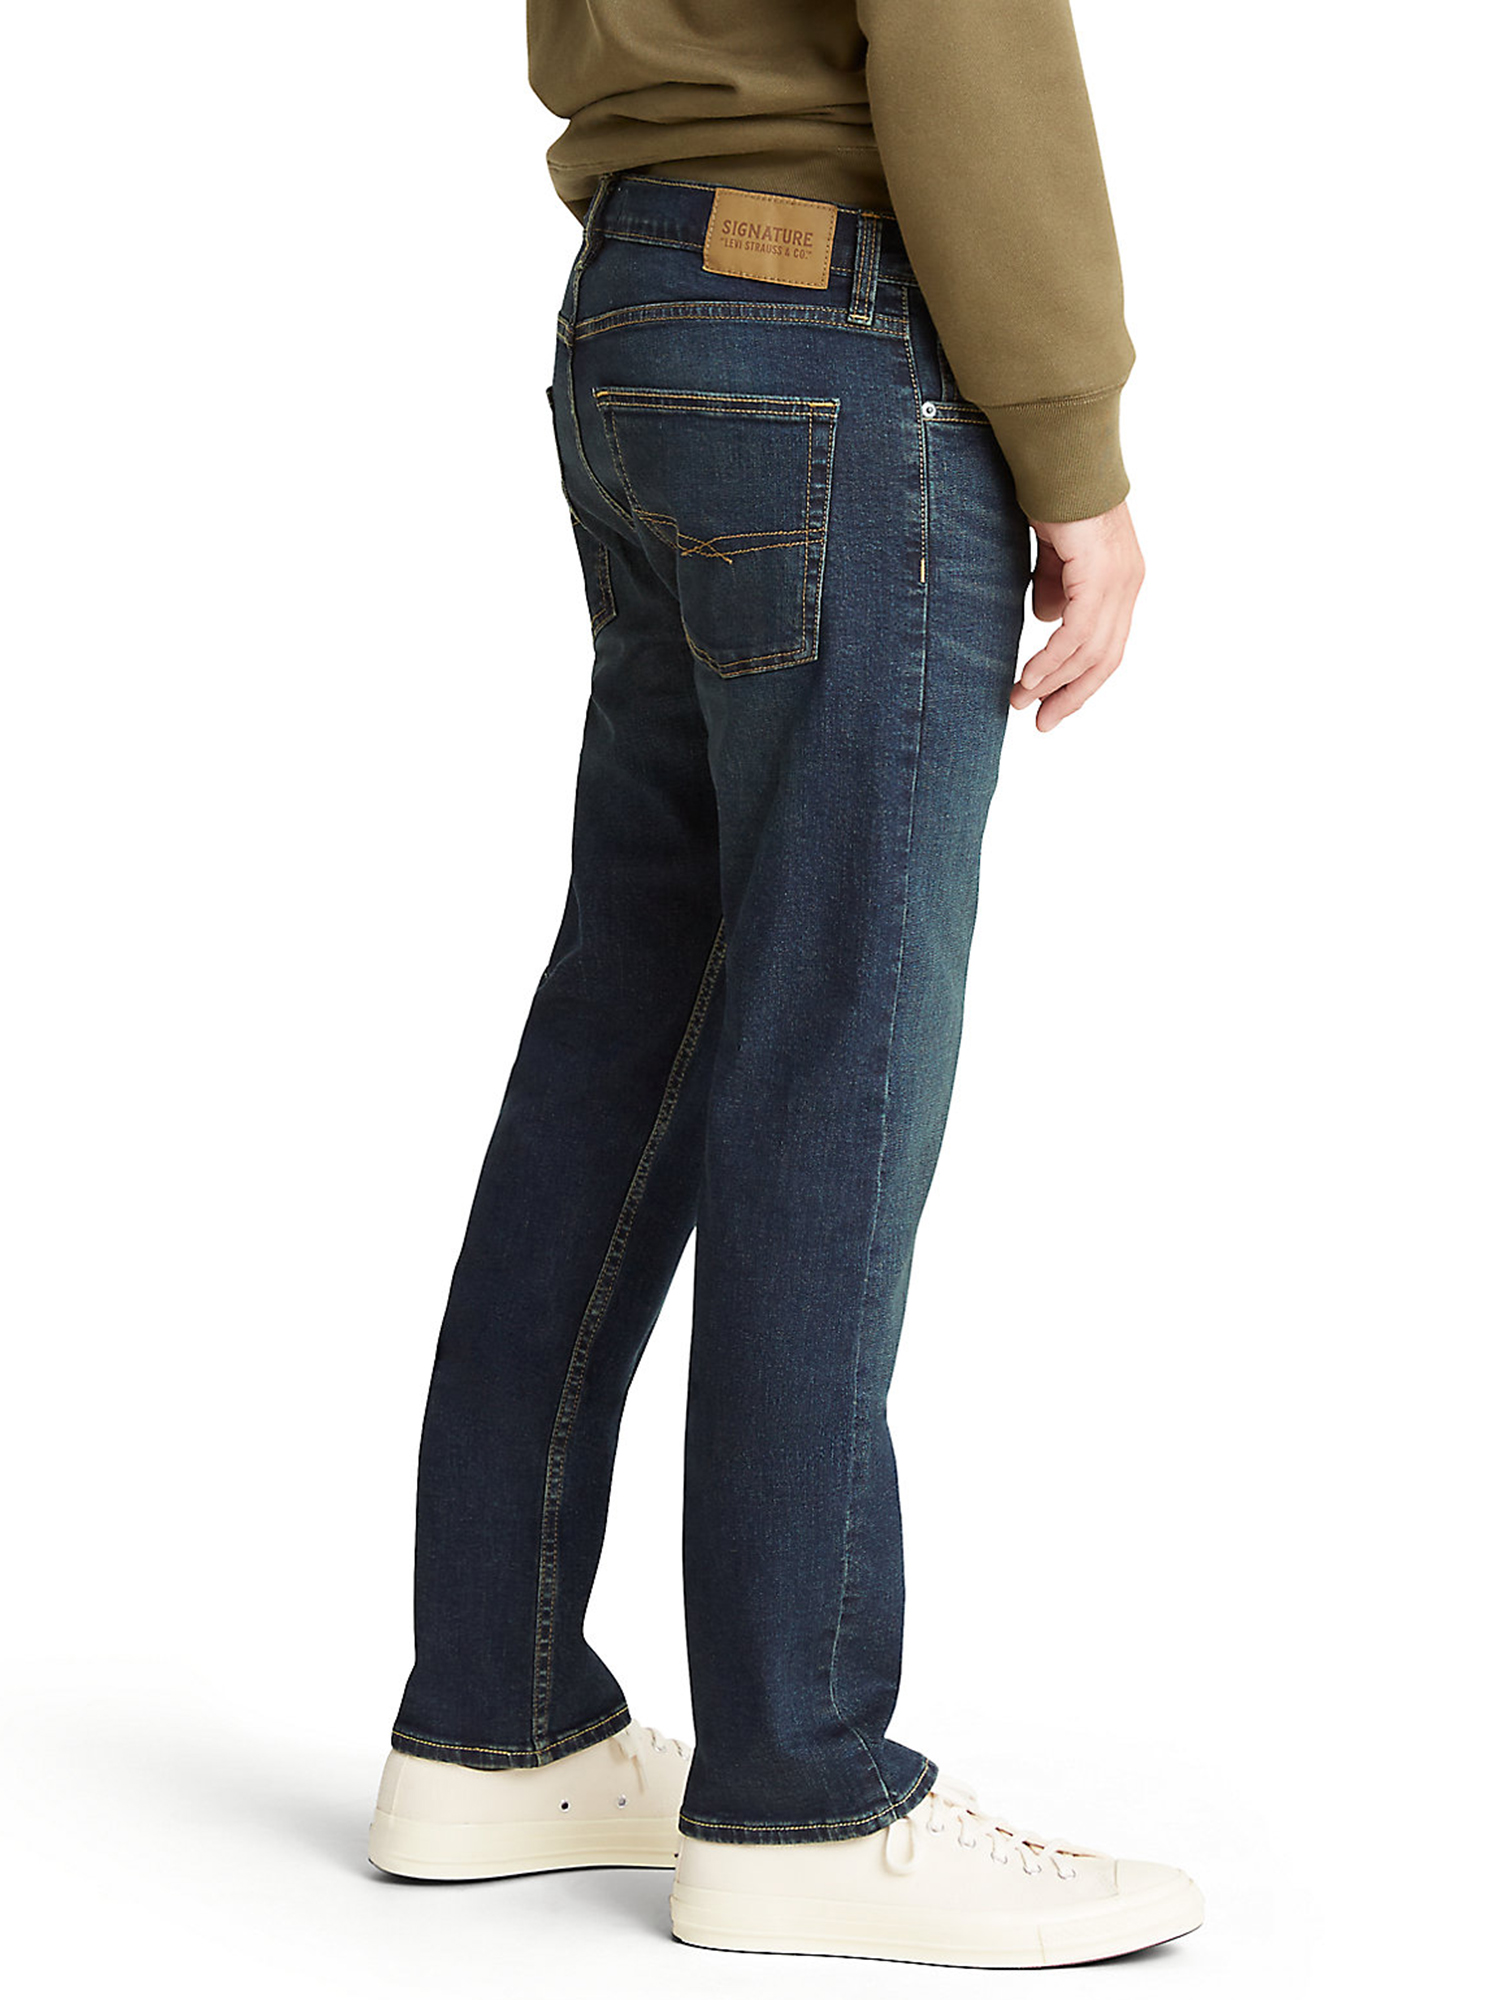 Signature by Levi Strauss & Co. Men's and Big and Tall Straight Fit Jeans - image 3 of 7